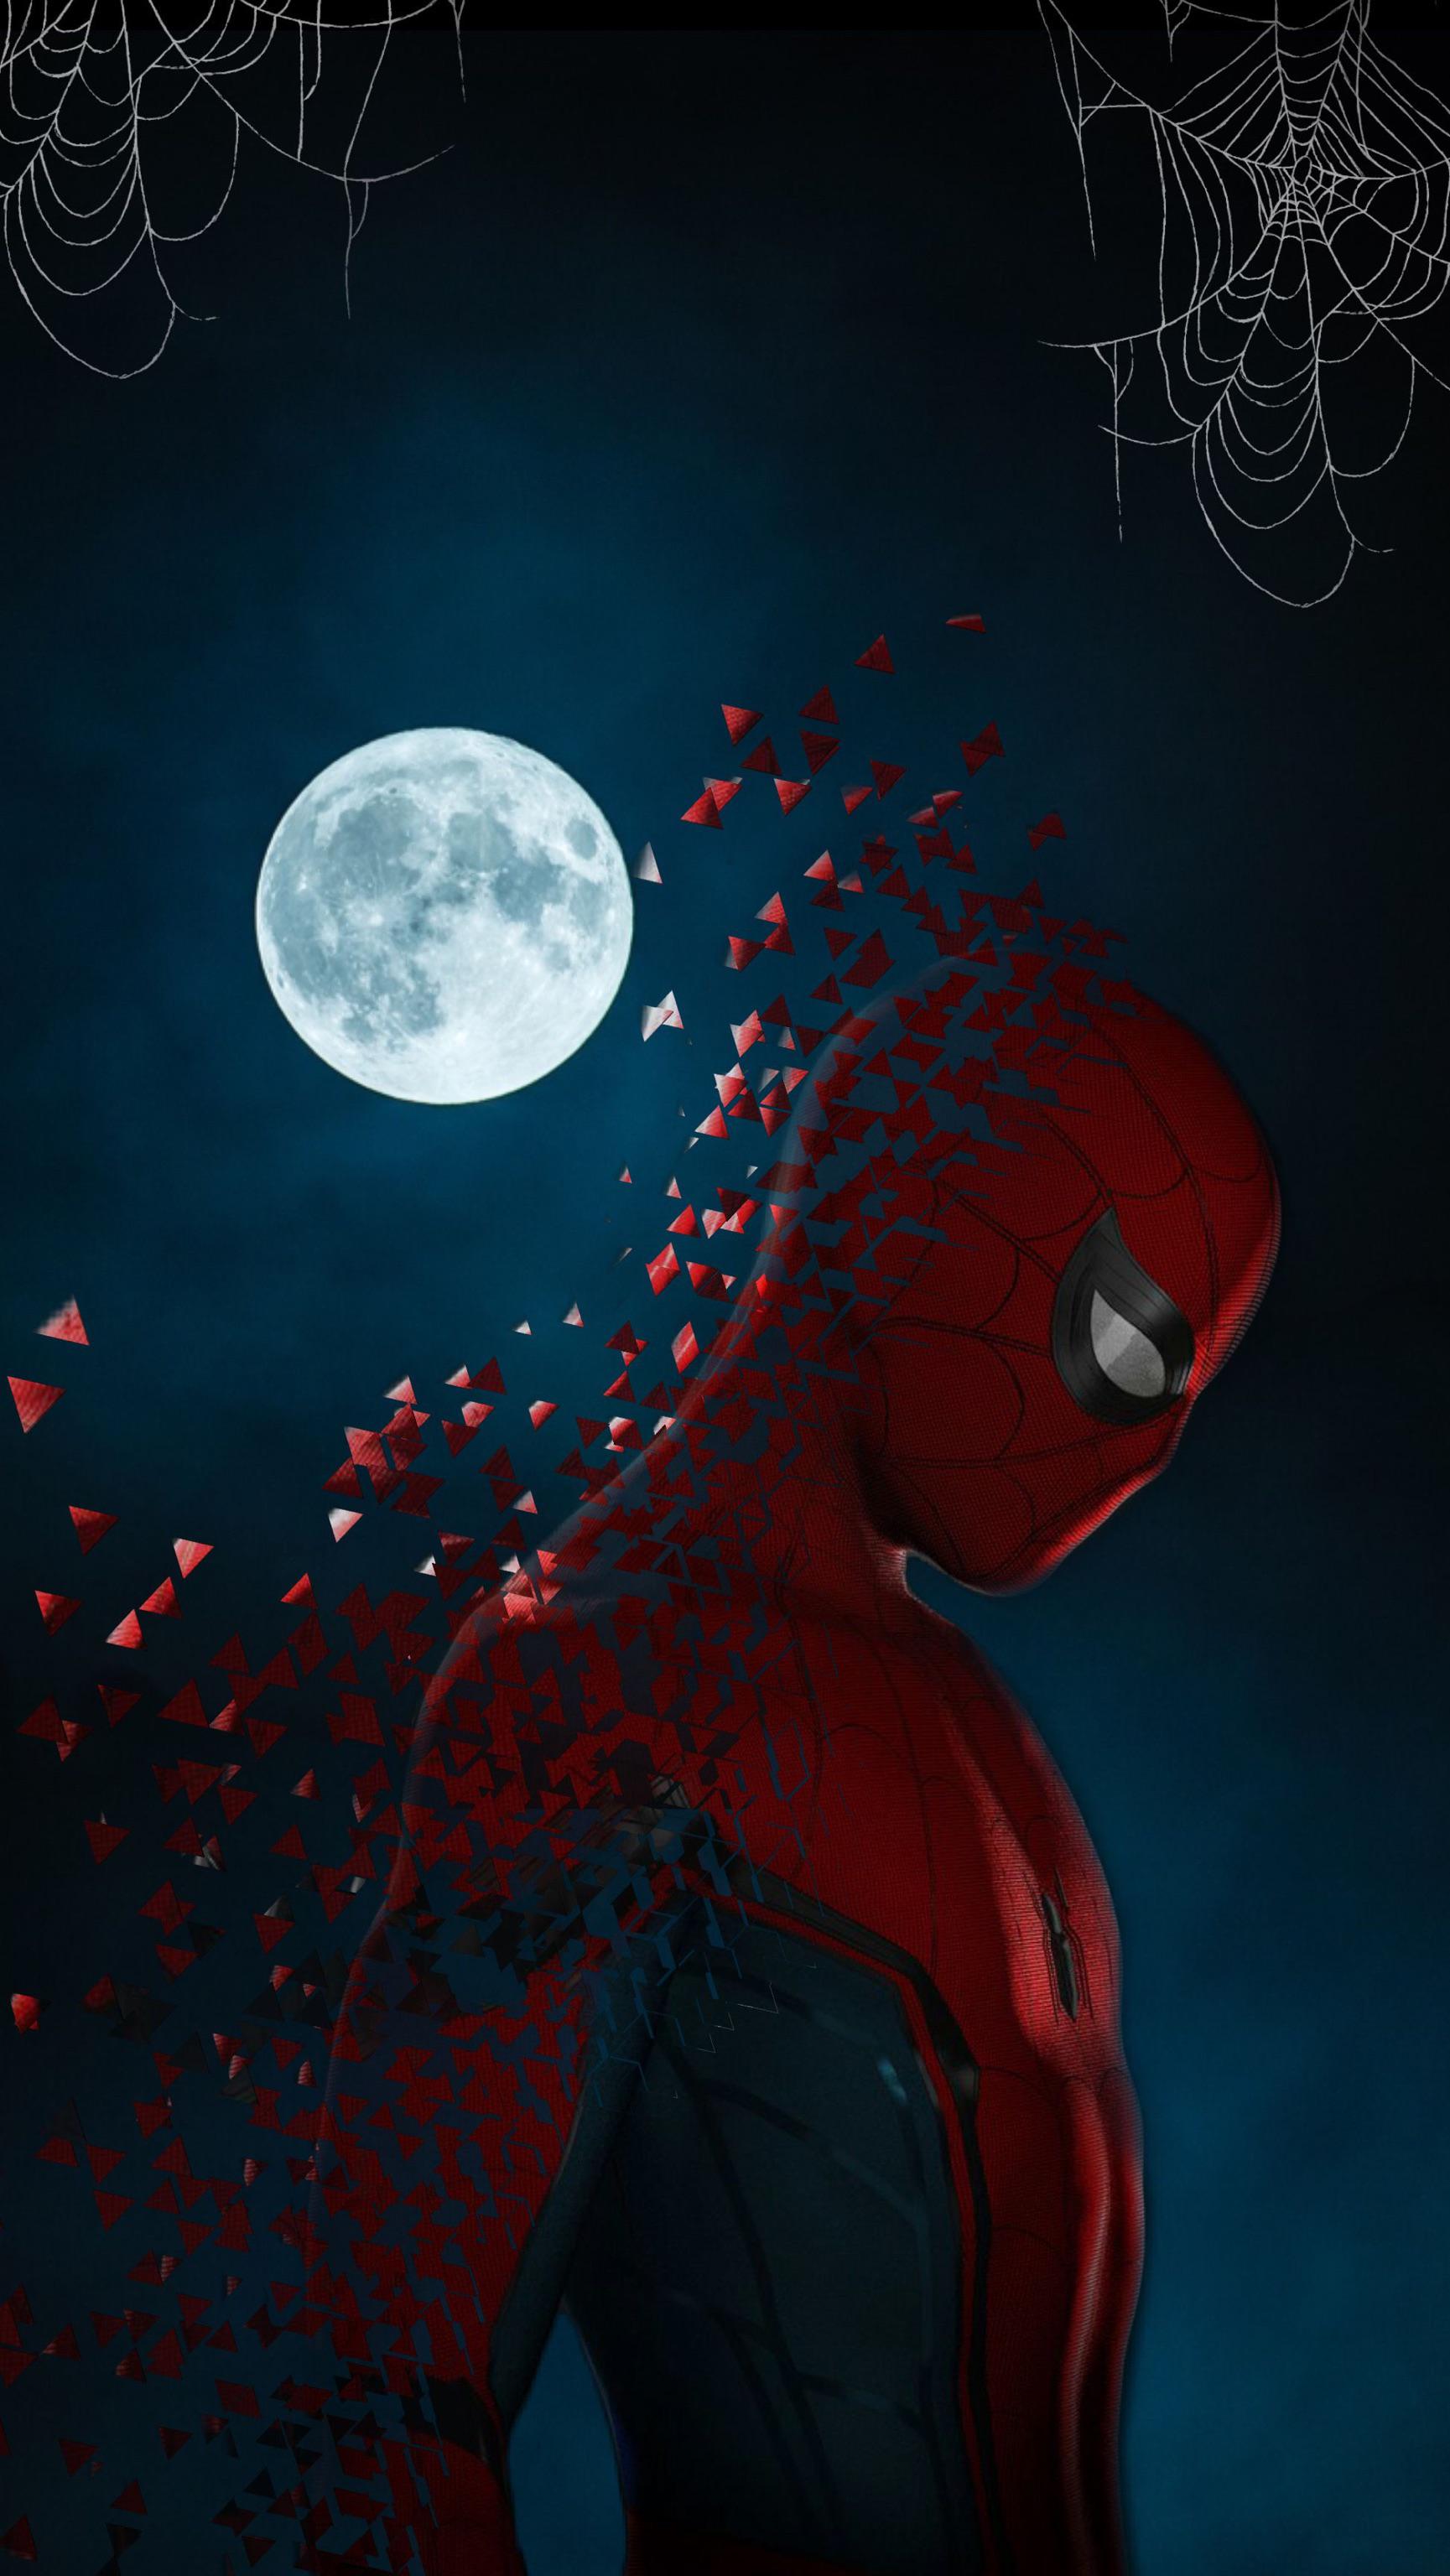 IPhone wallpaper of Spiderman in front of a full moon - 